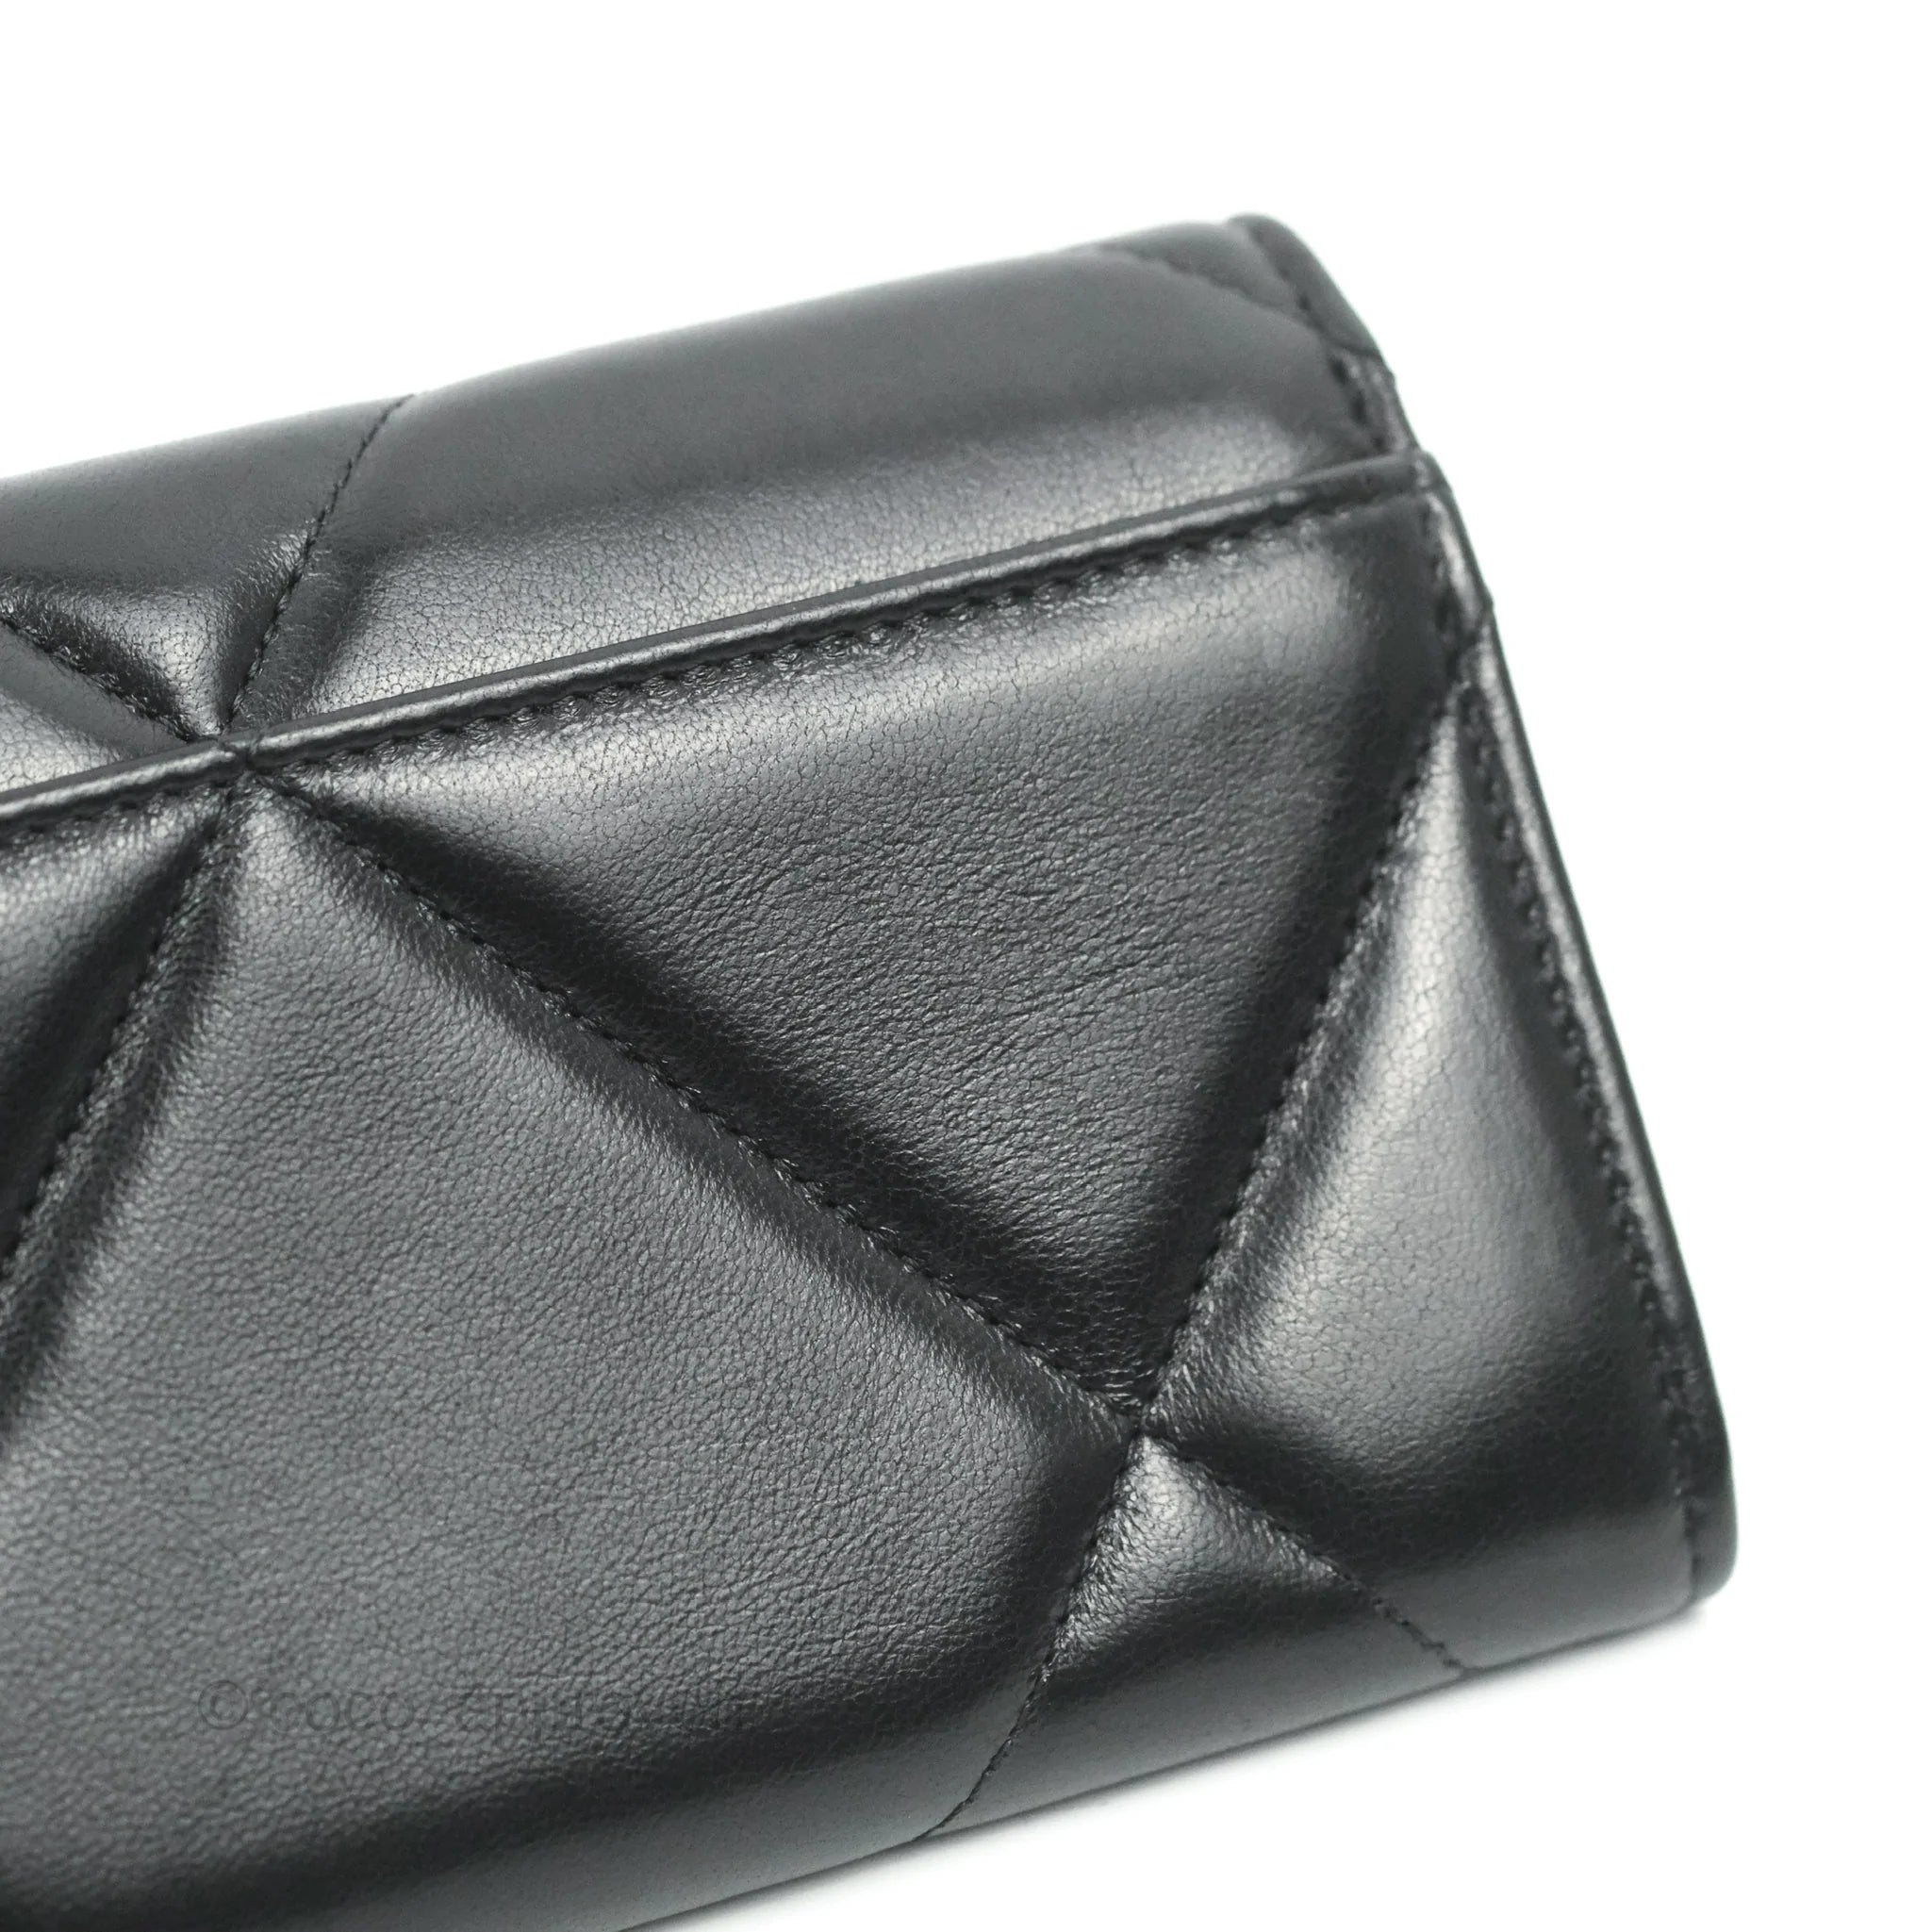 CHANEL, Other, Auth Chanel Classic Black Lambskin Cc Quilted Passport  Holder